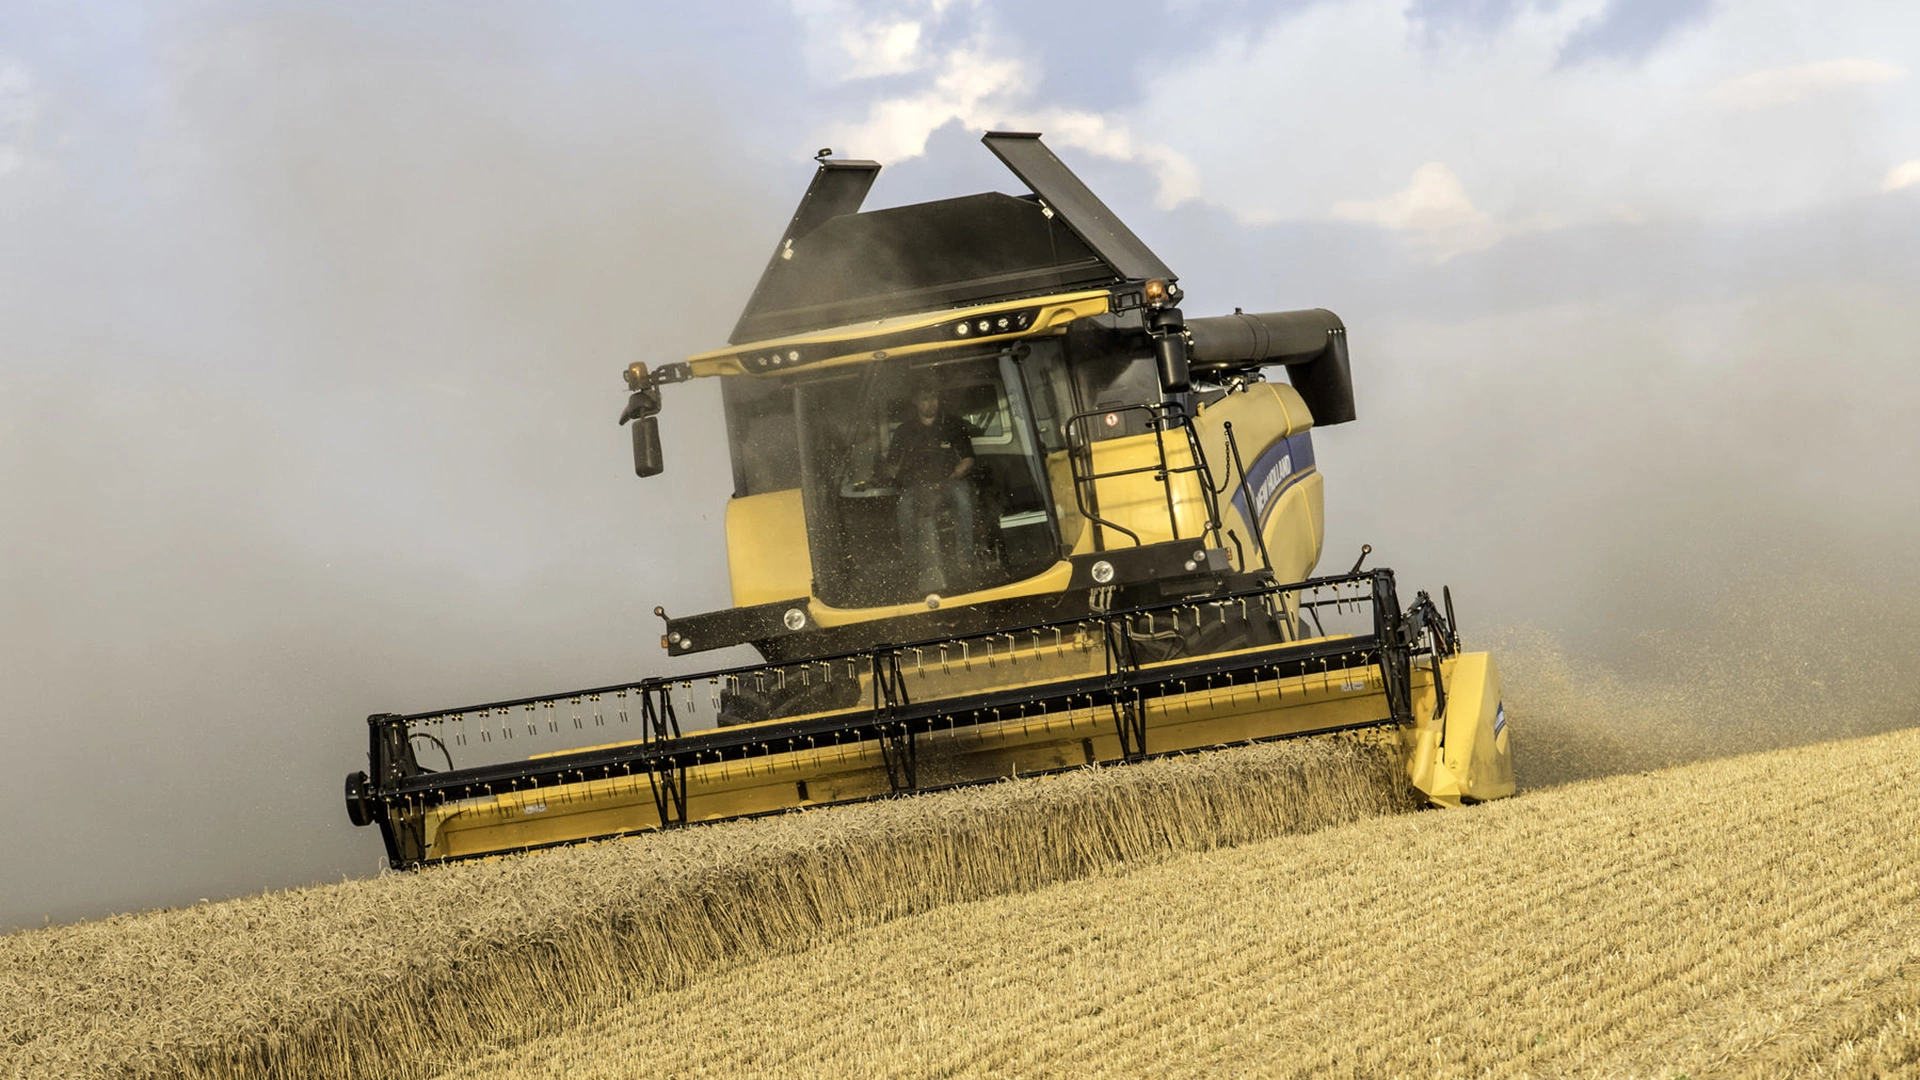 New Holland CX5-CX6 Combine Harvester in action, efficiently harvesting with agricultural combine header